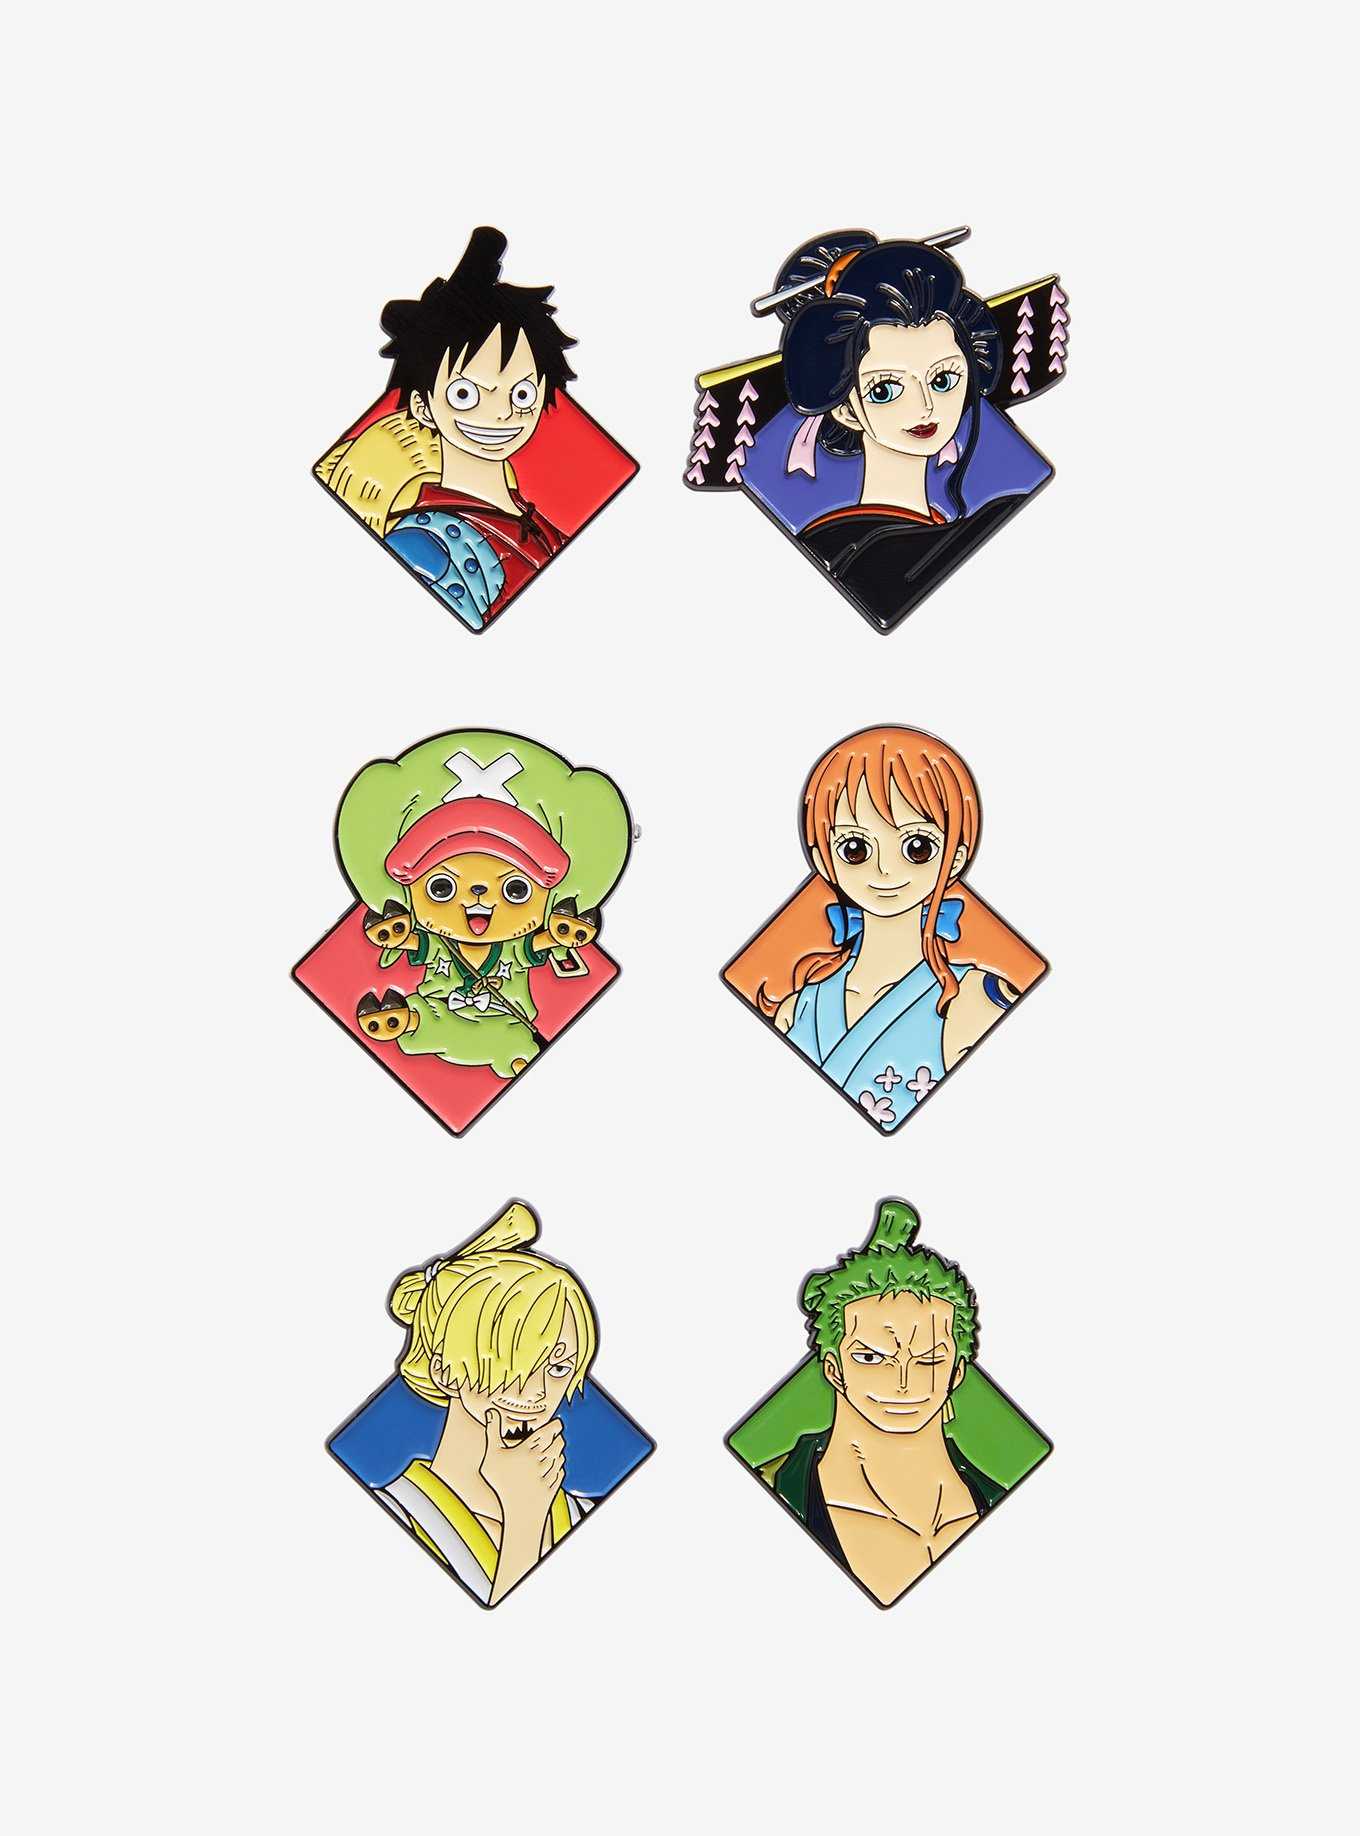 One of the Stickers I created for my collection of Punk One Piece